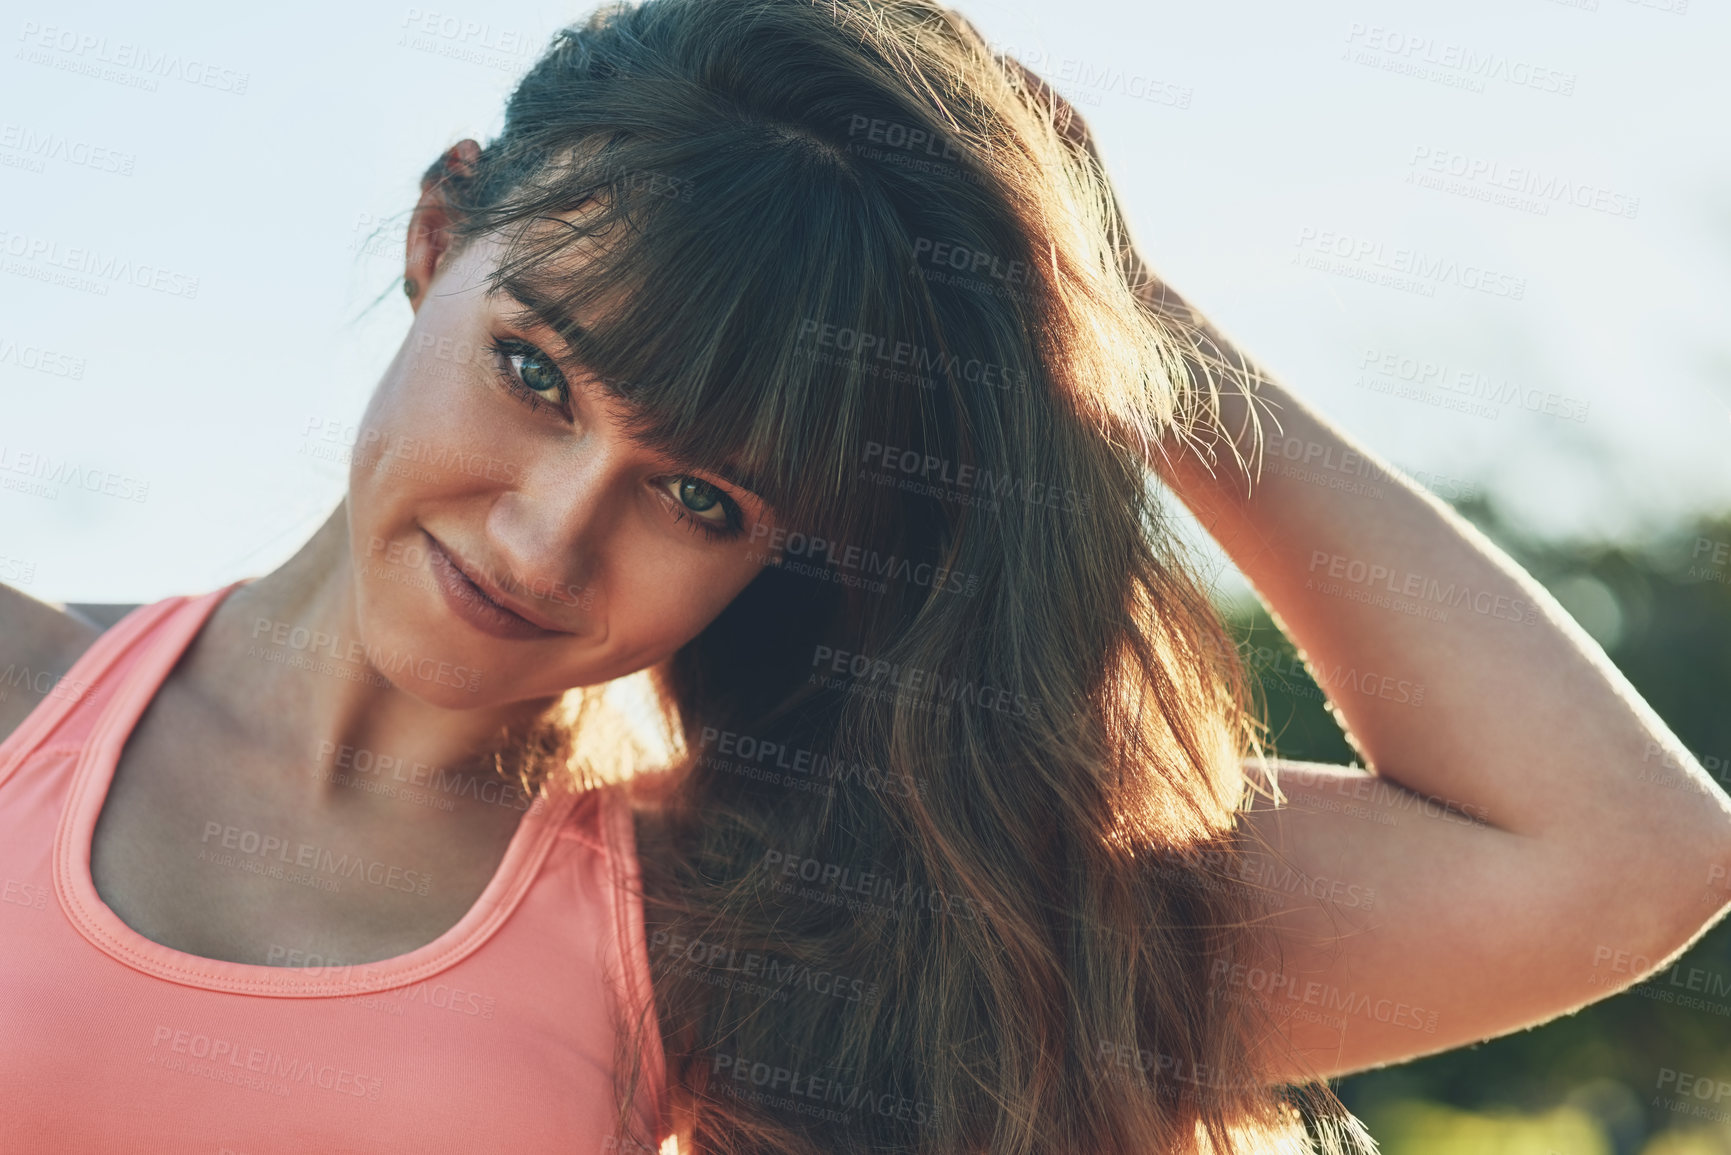 Buy stock photo Cropped shot of a beautiful young woman out for her morning workout